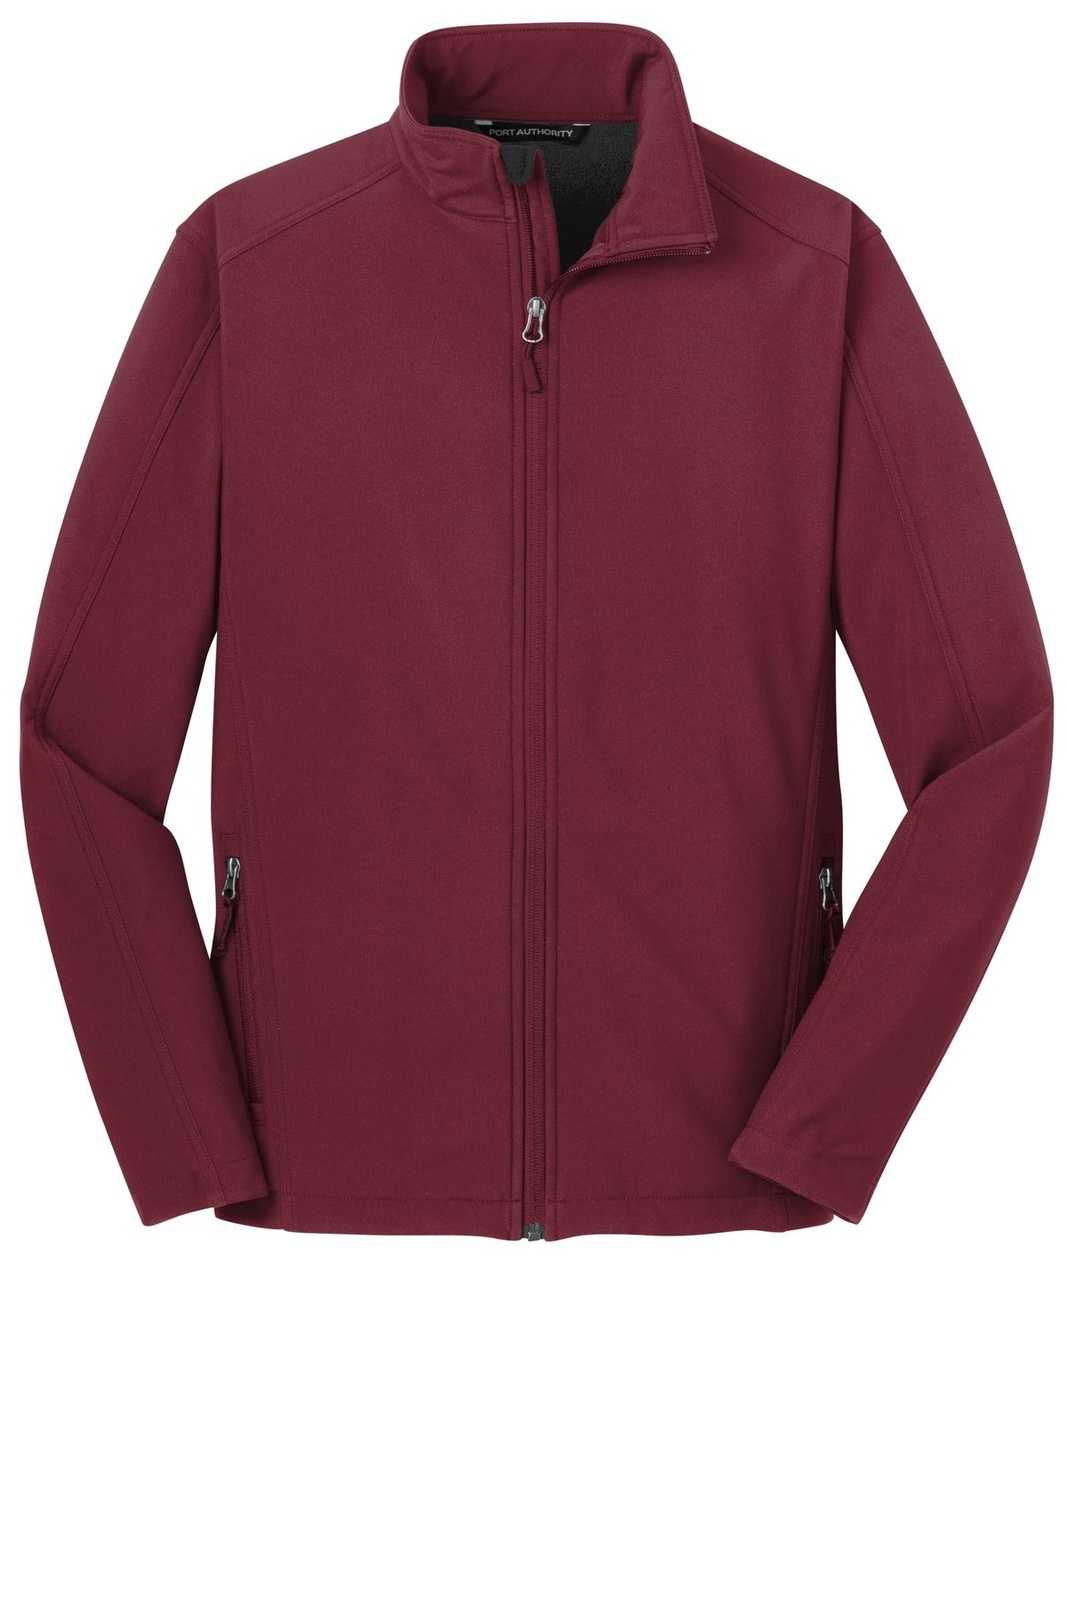 Port Authority J317 Core Soft Shell Jacket - Maroon - HIT a Double - 5